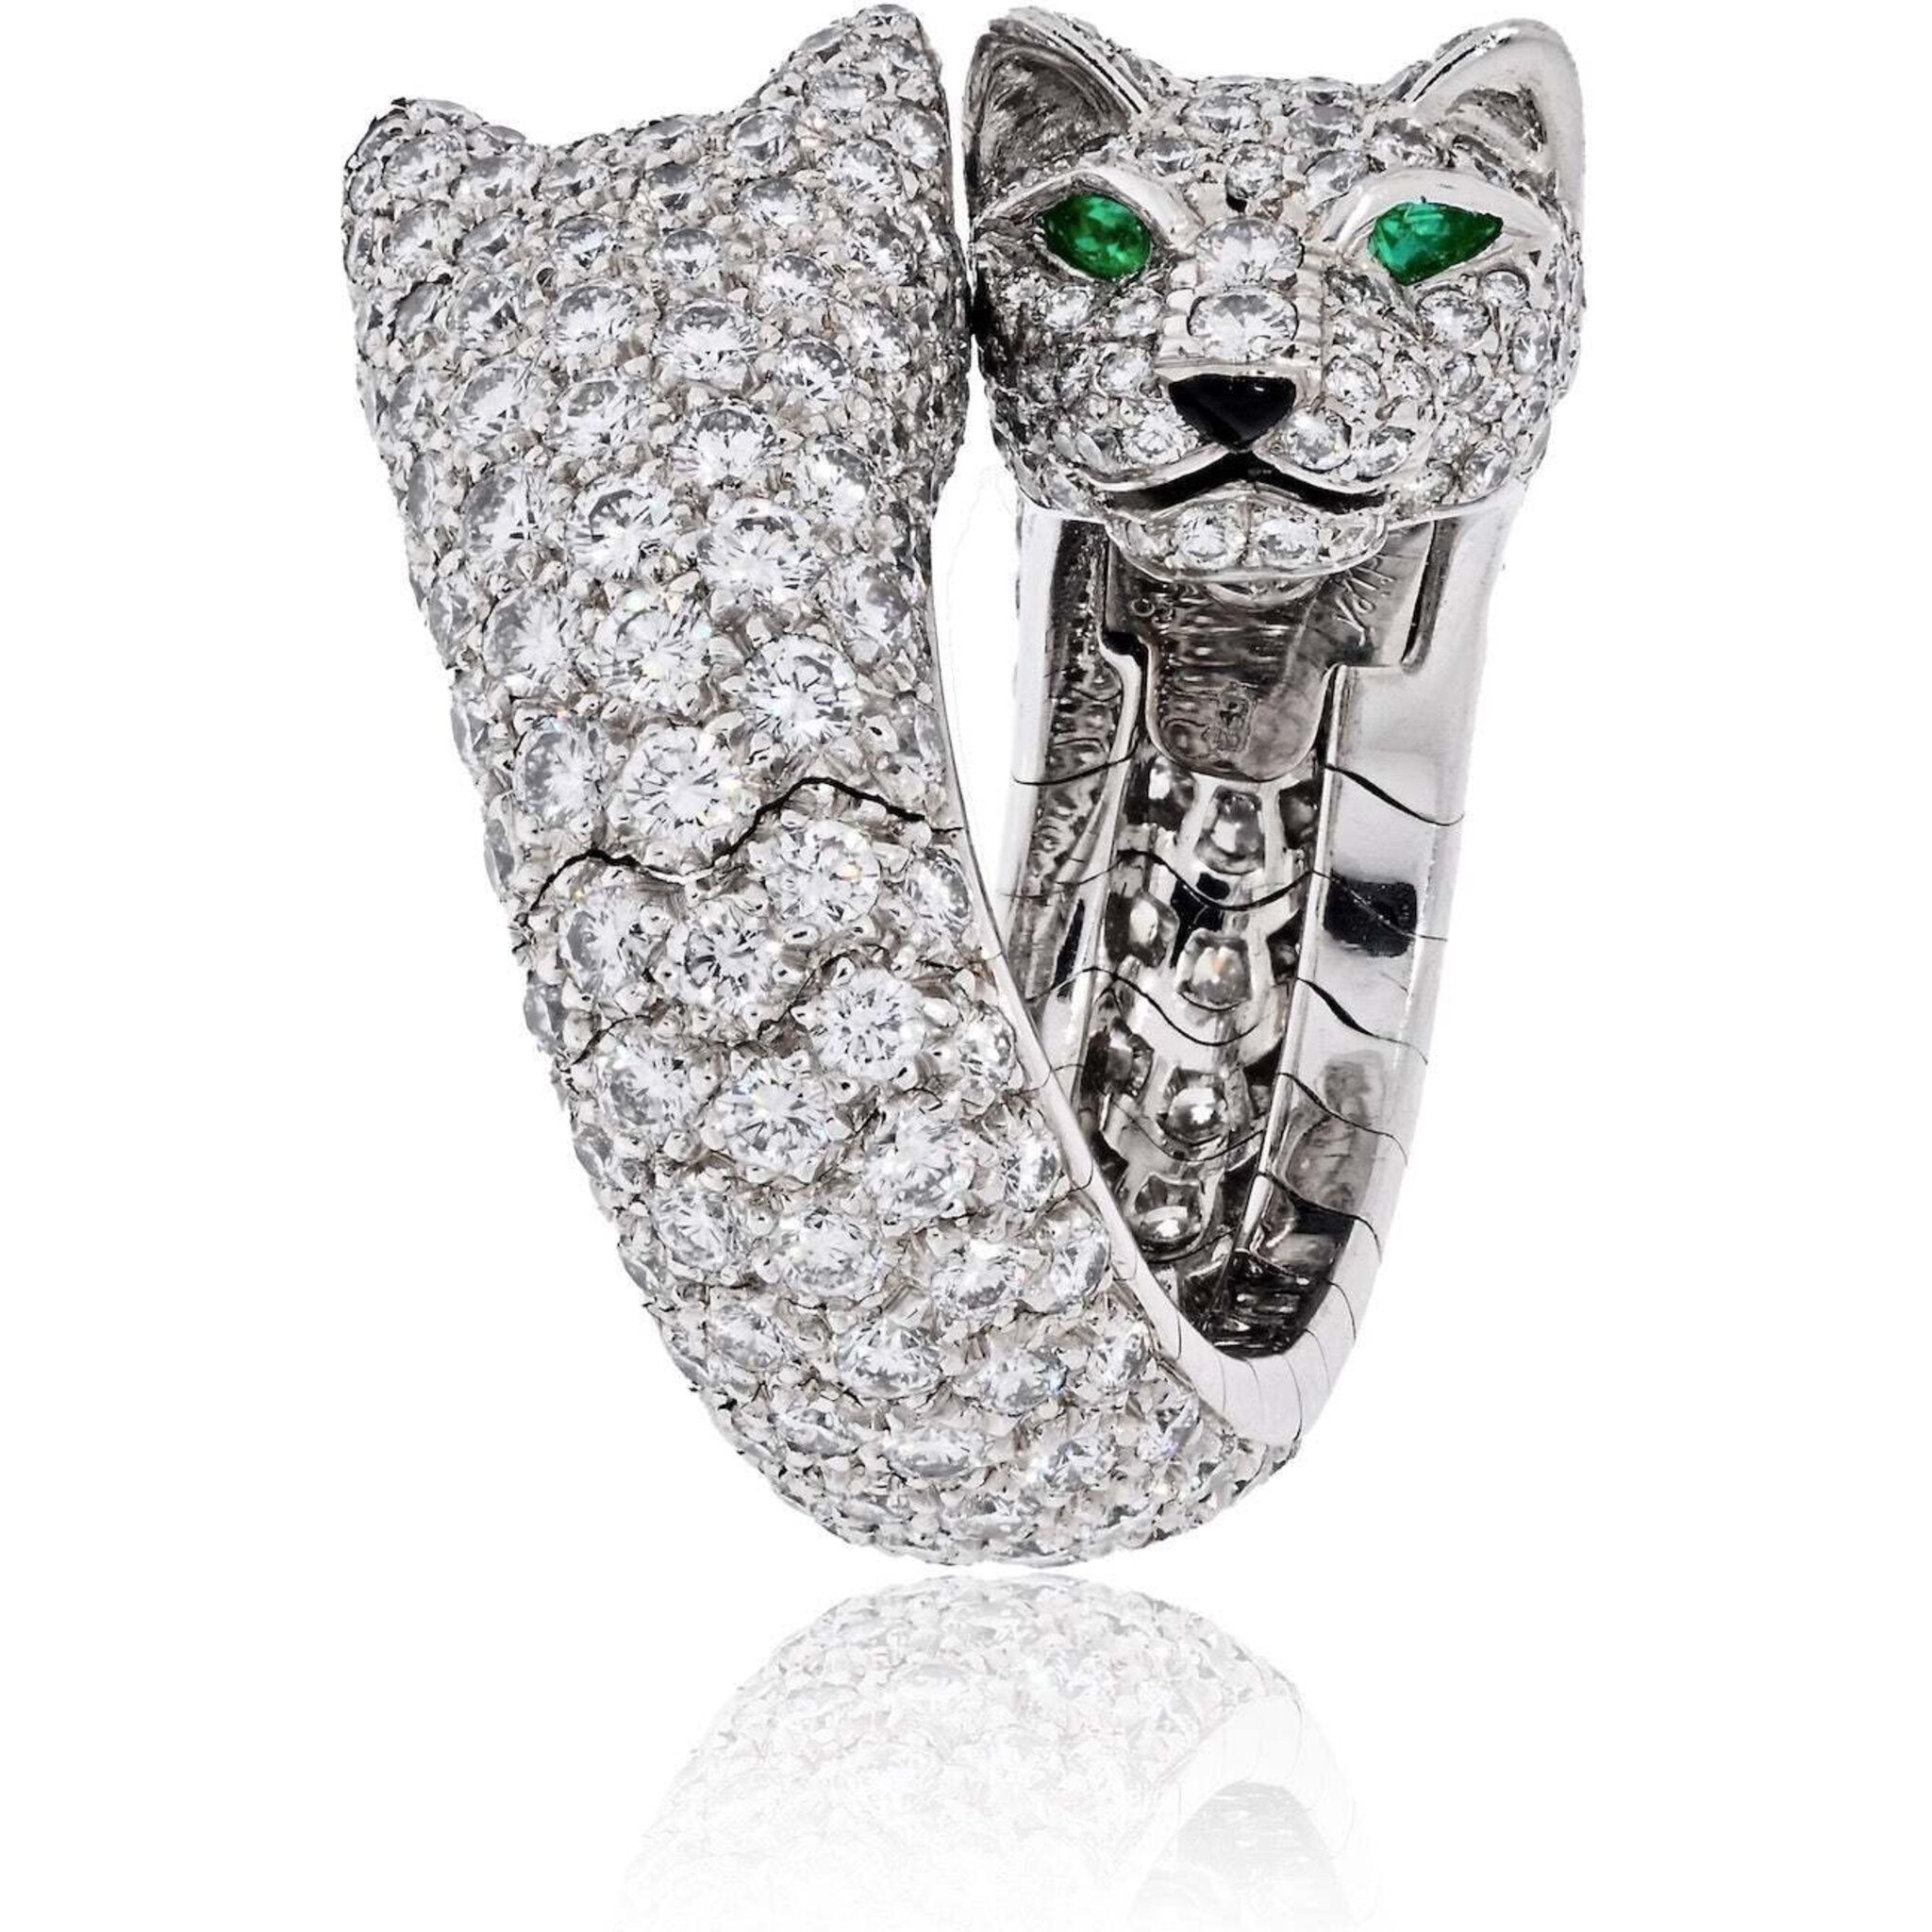 A Gorgeous Cartier Panthere Gemstone and Diamond Ring